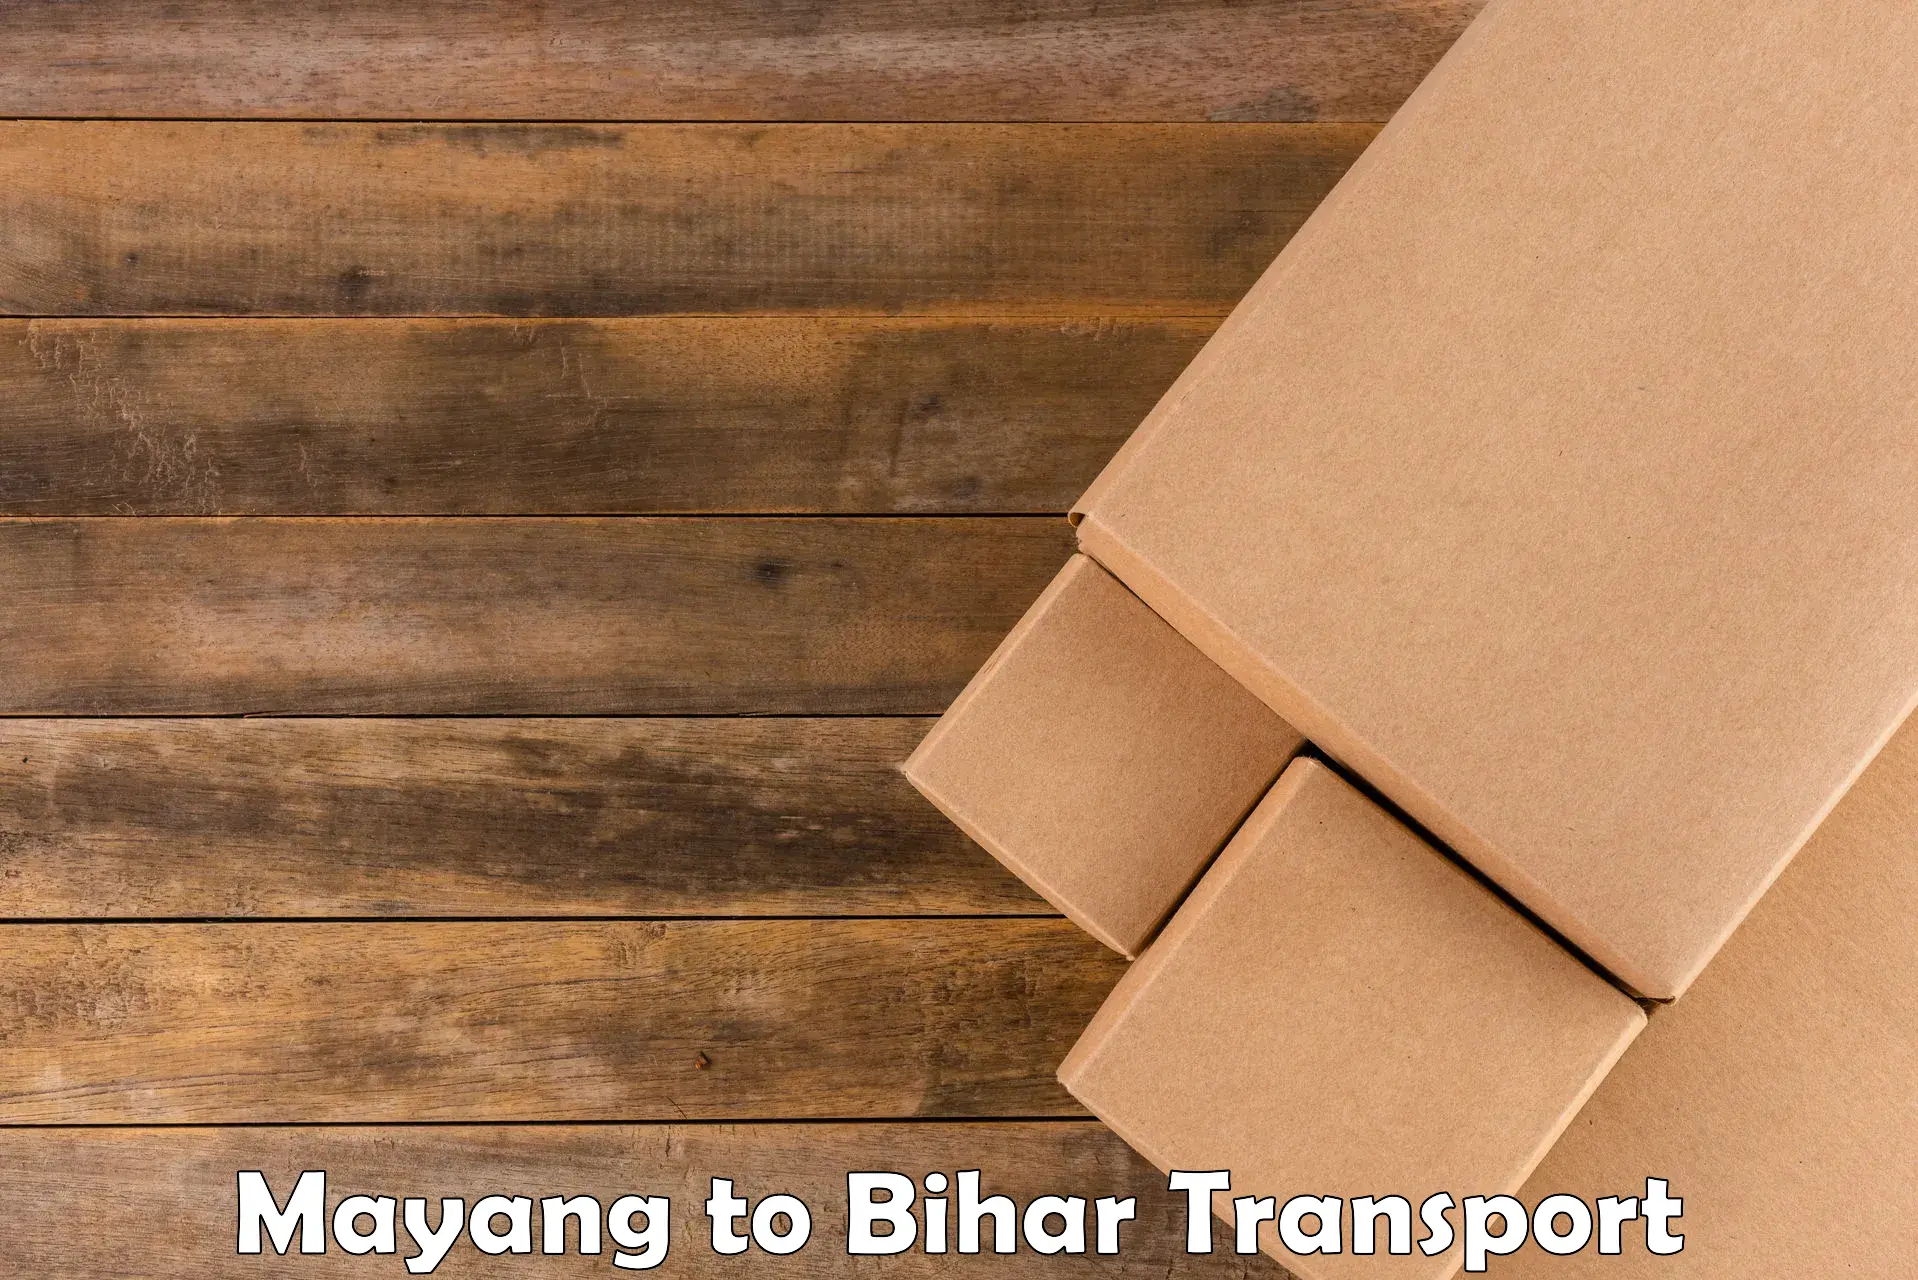 Nearby transport service Mayang to Araria